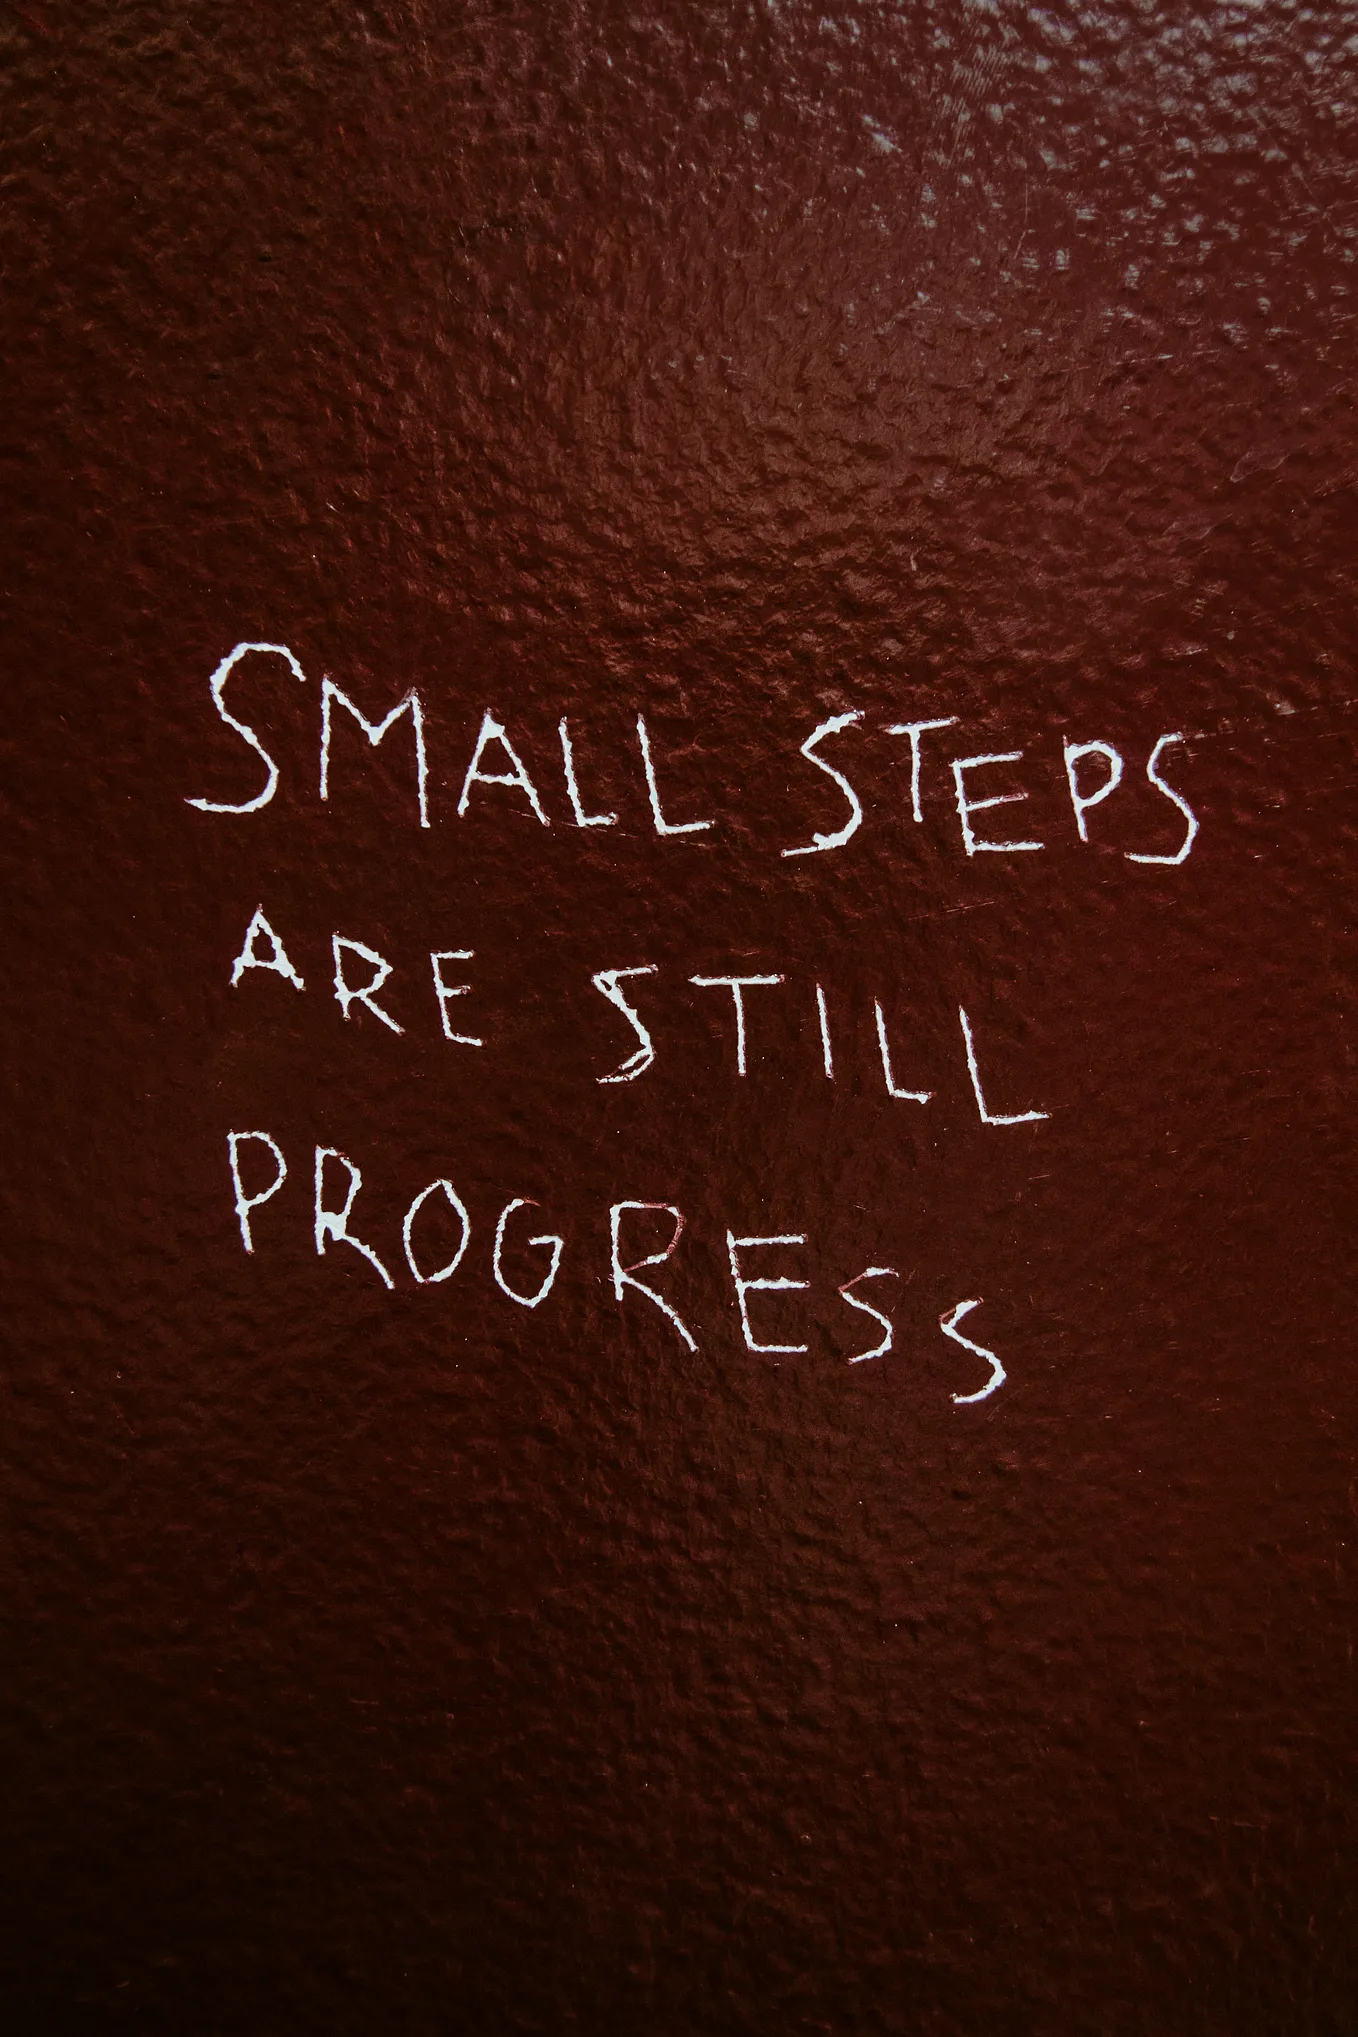 WHAT YOU NEED IS BABY STEPS.